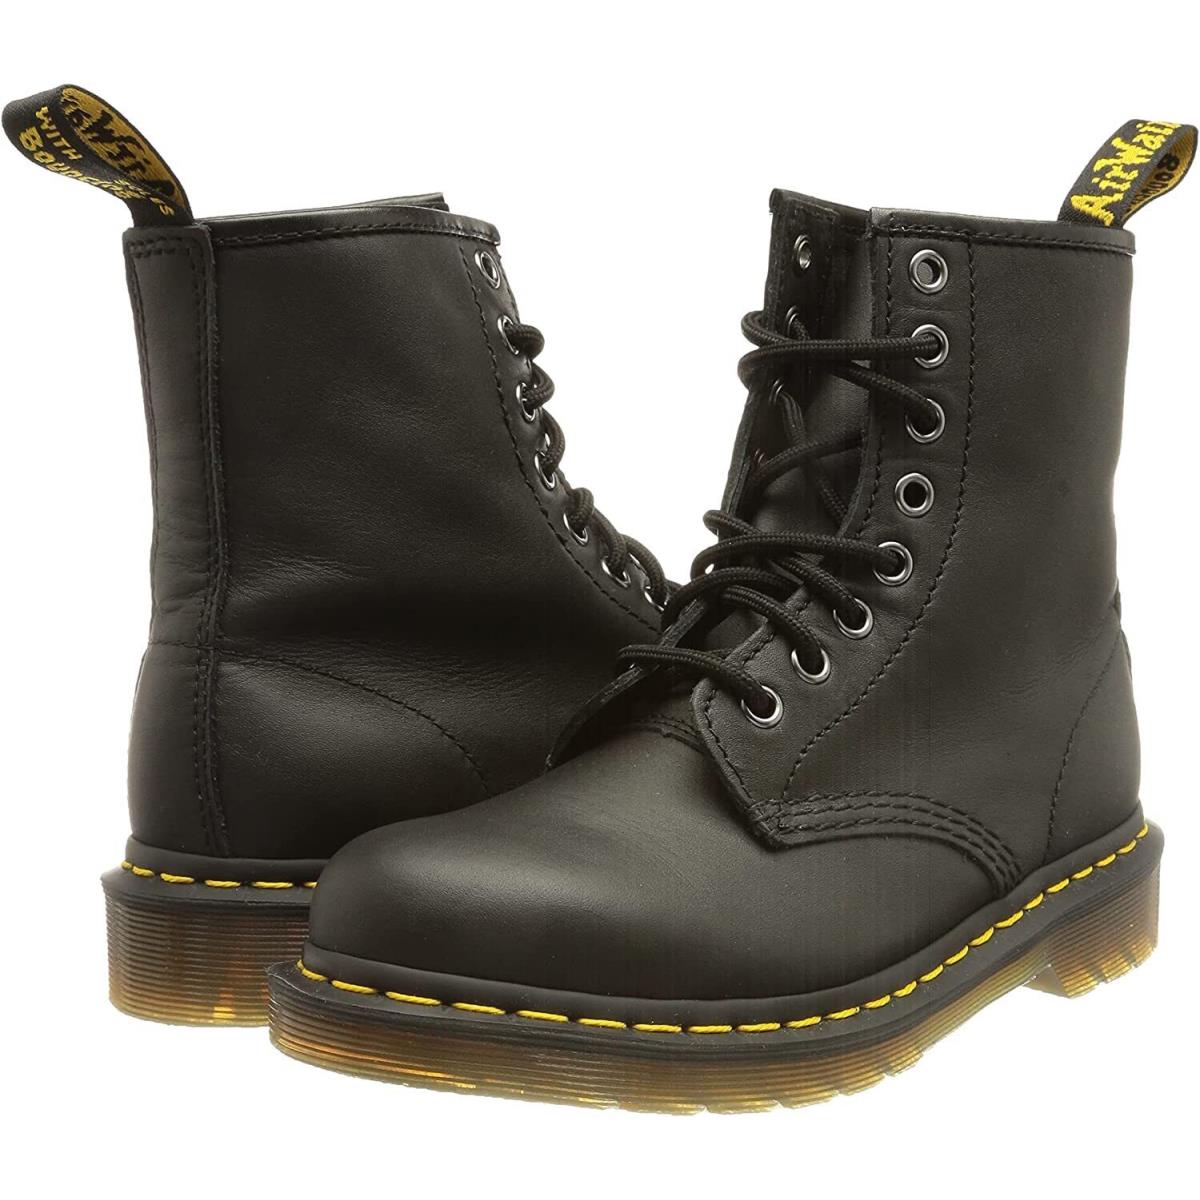 Mens Shoes Dr. Martens 1460 8 Eye Leather Boots 11822003 Black Greasy